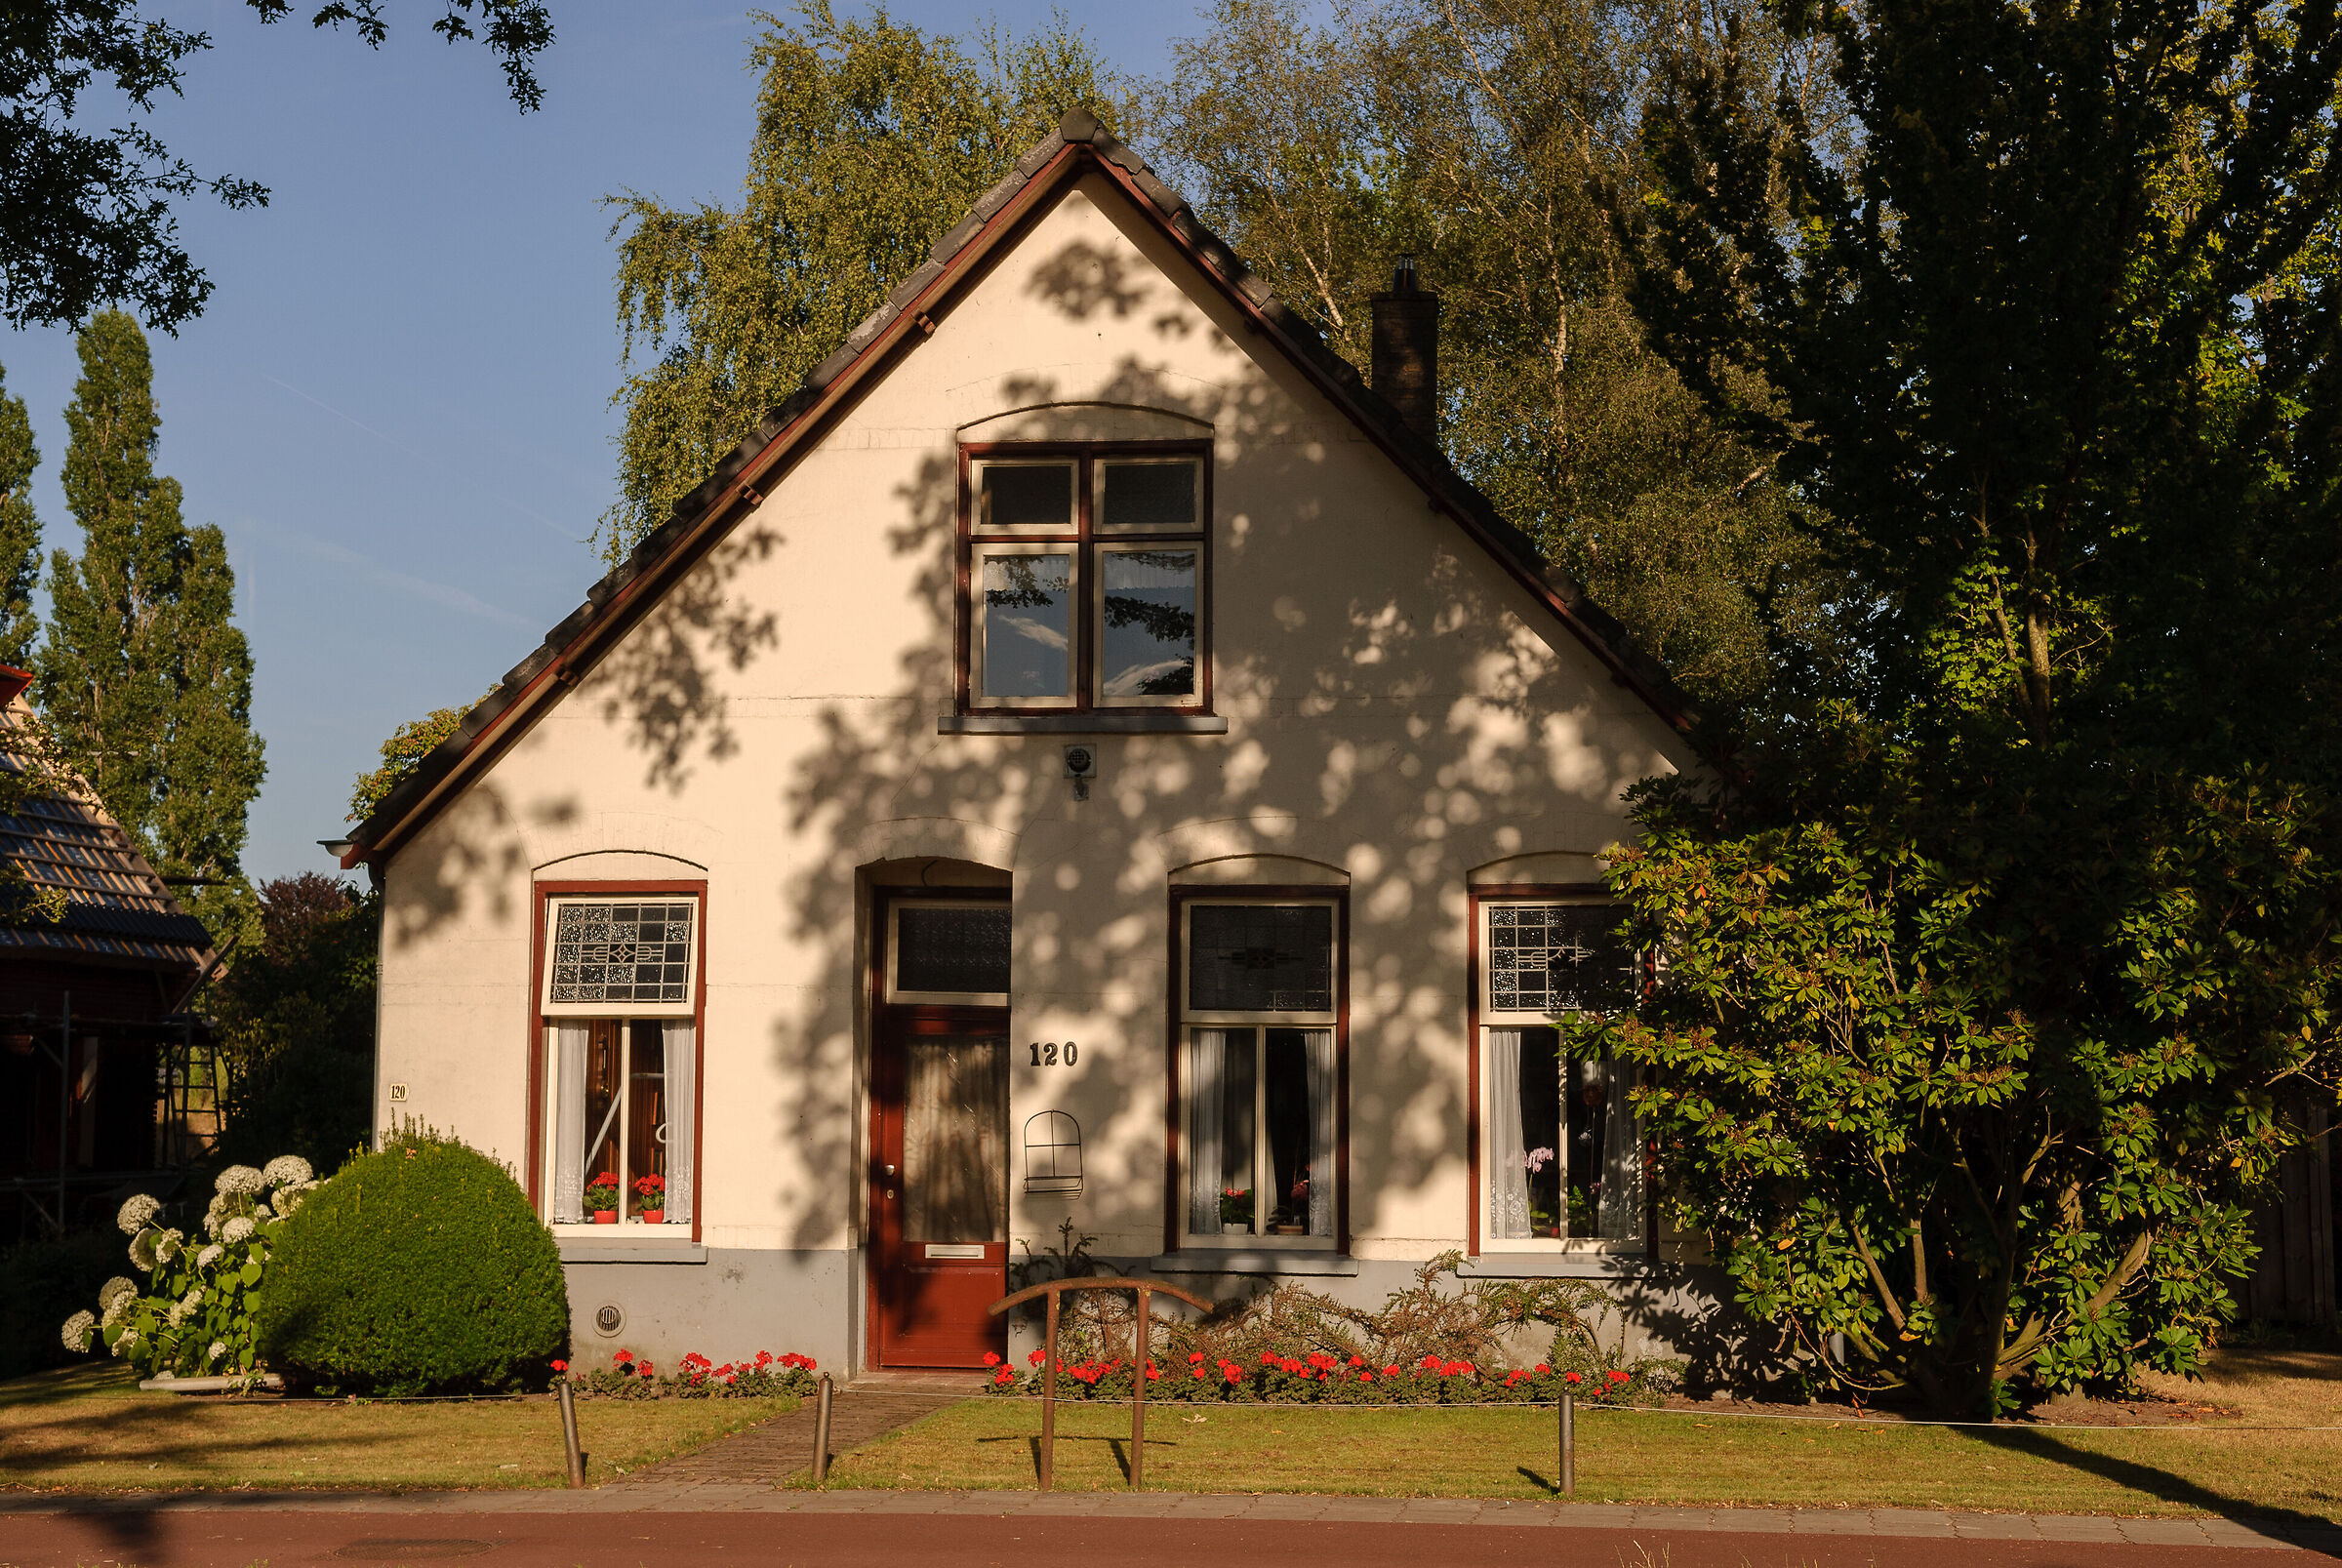 Typical simple middle class house for the region (Emst)...